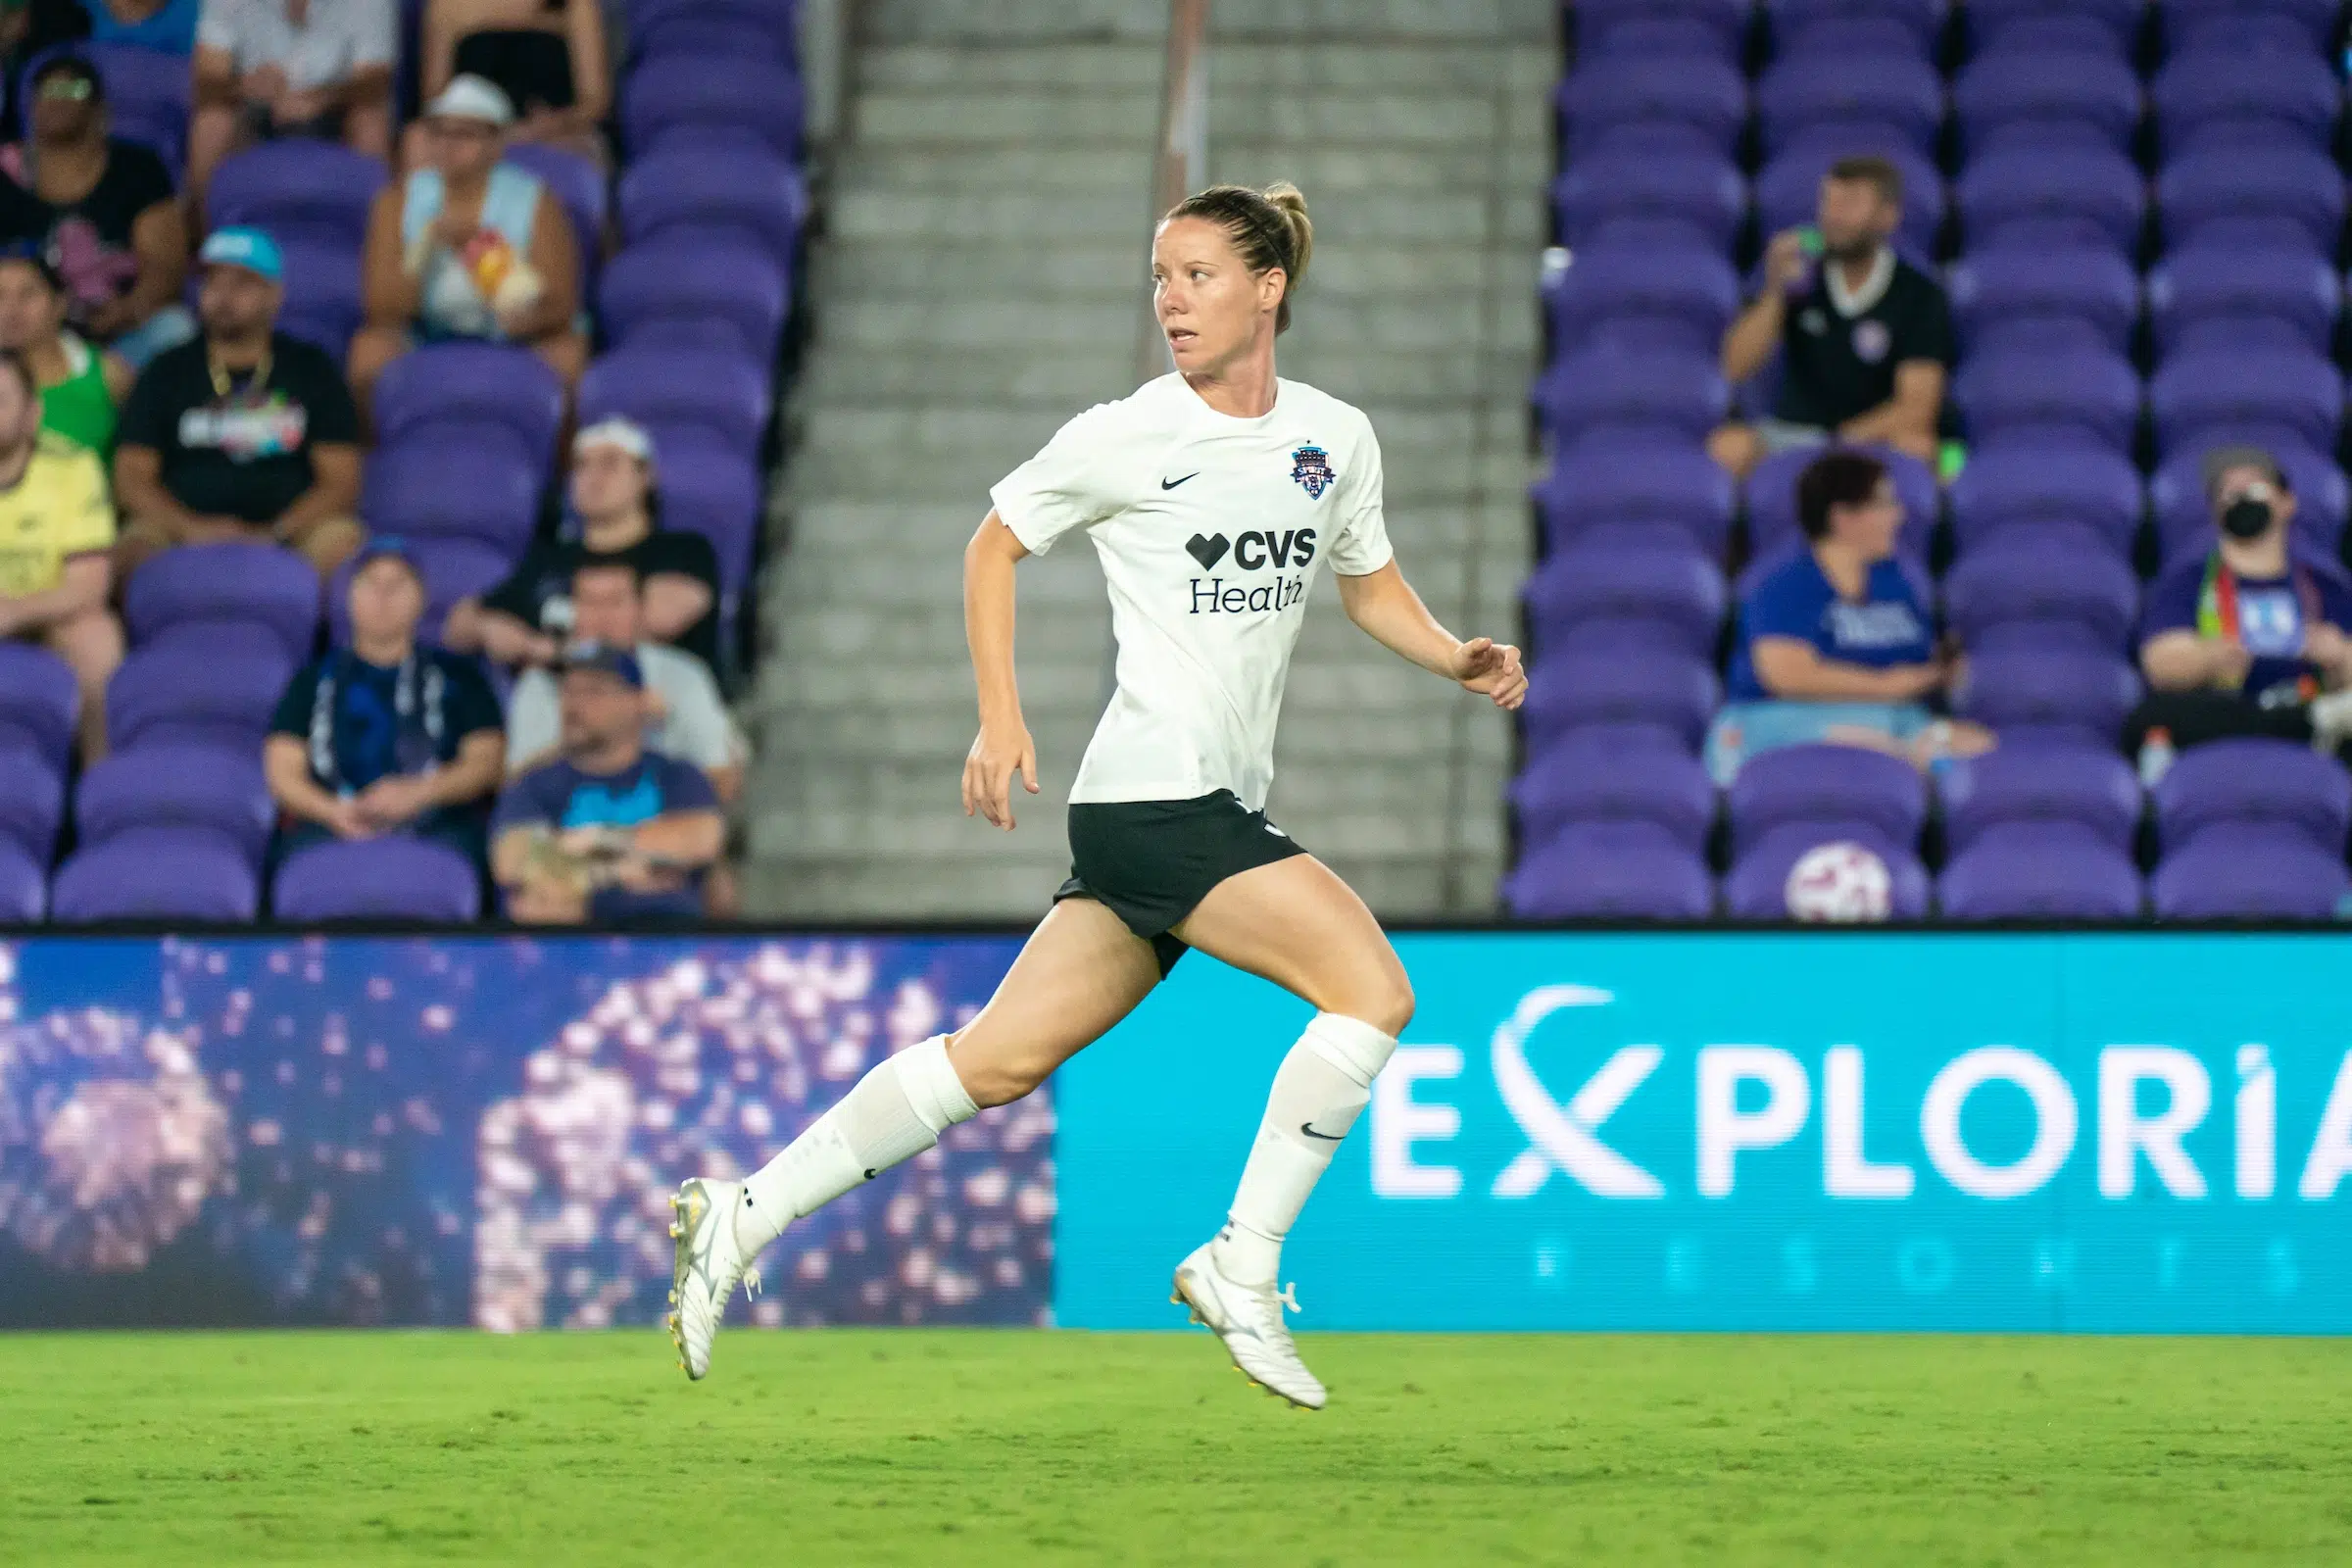 Annaig Butel in a white top and black shorts runs on a soccer field while looking backwards.